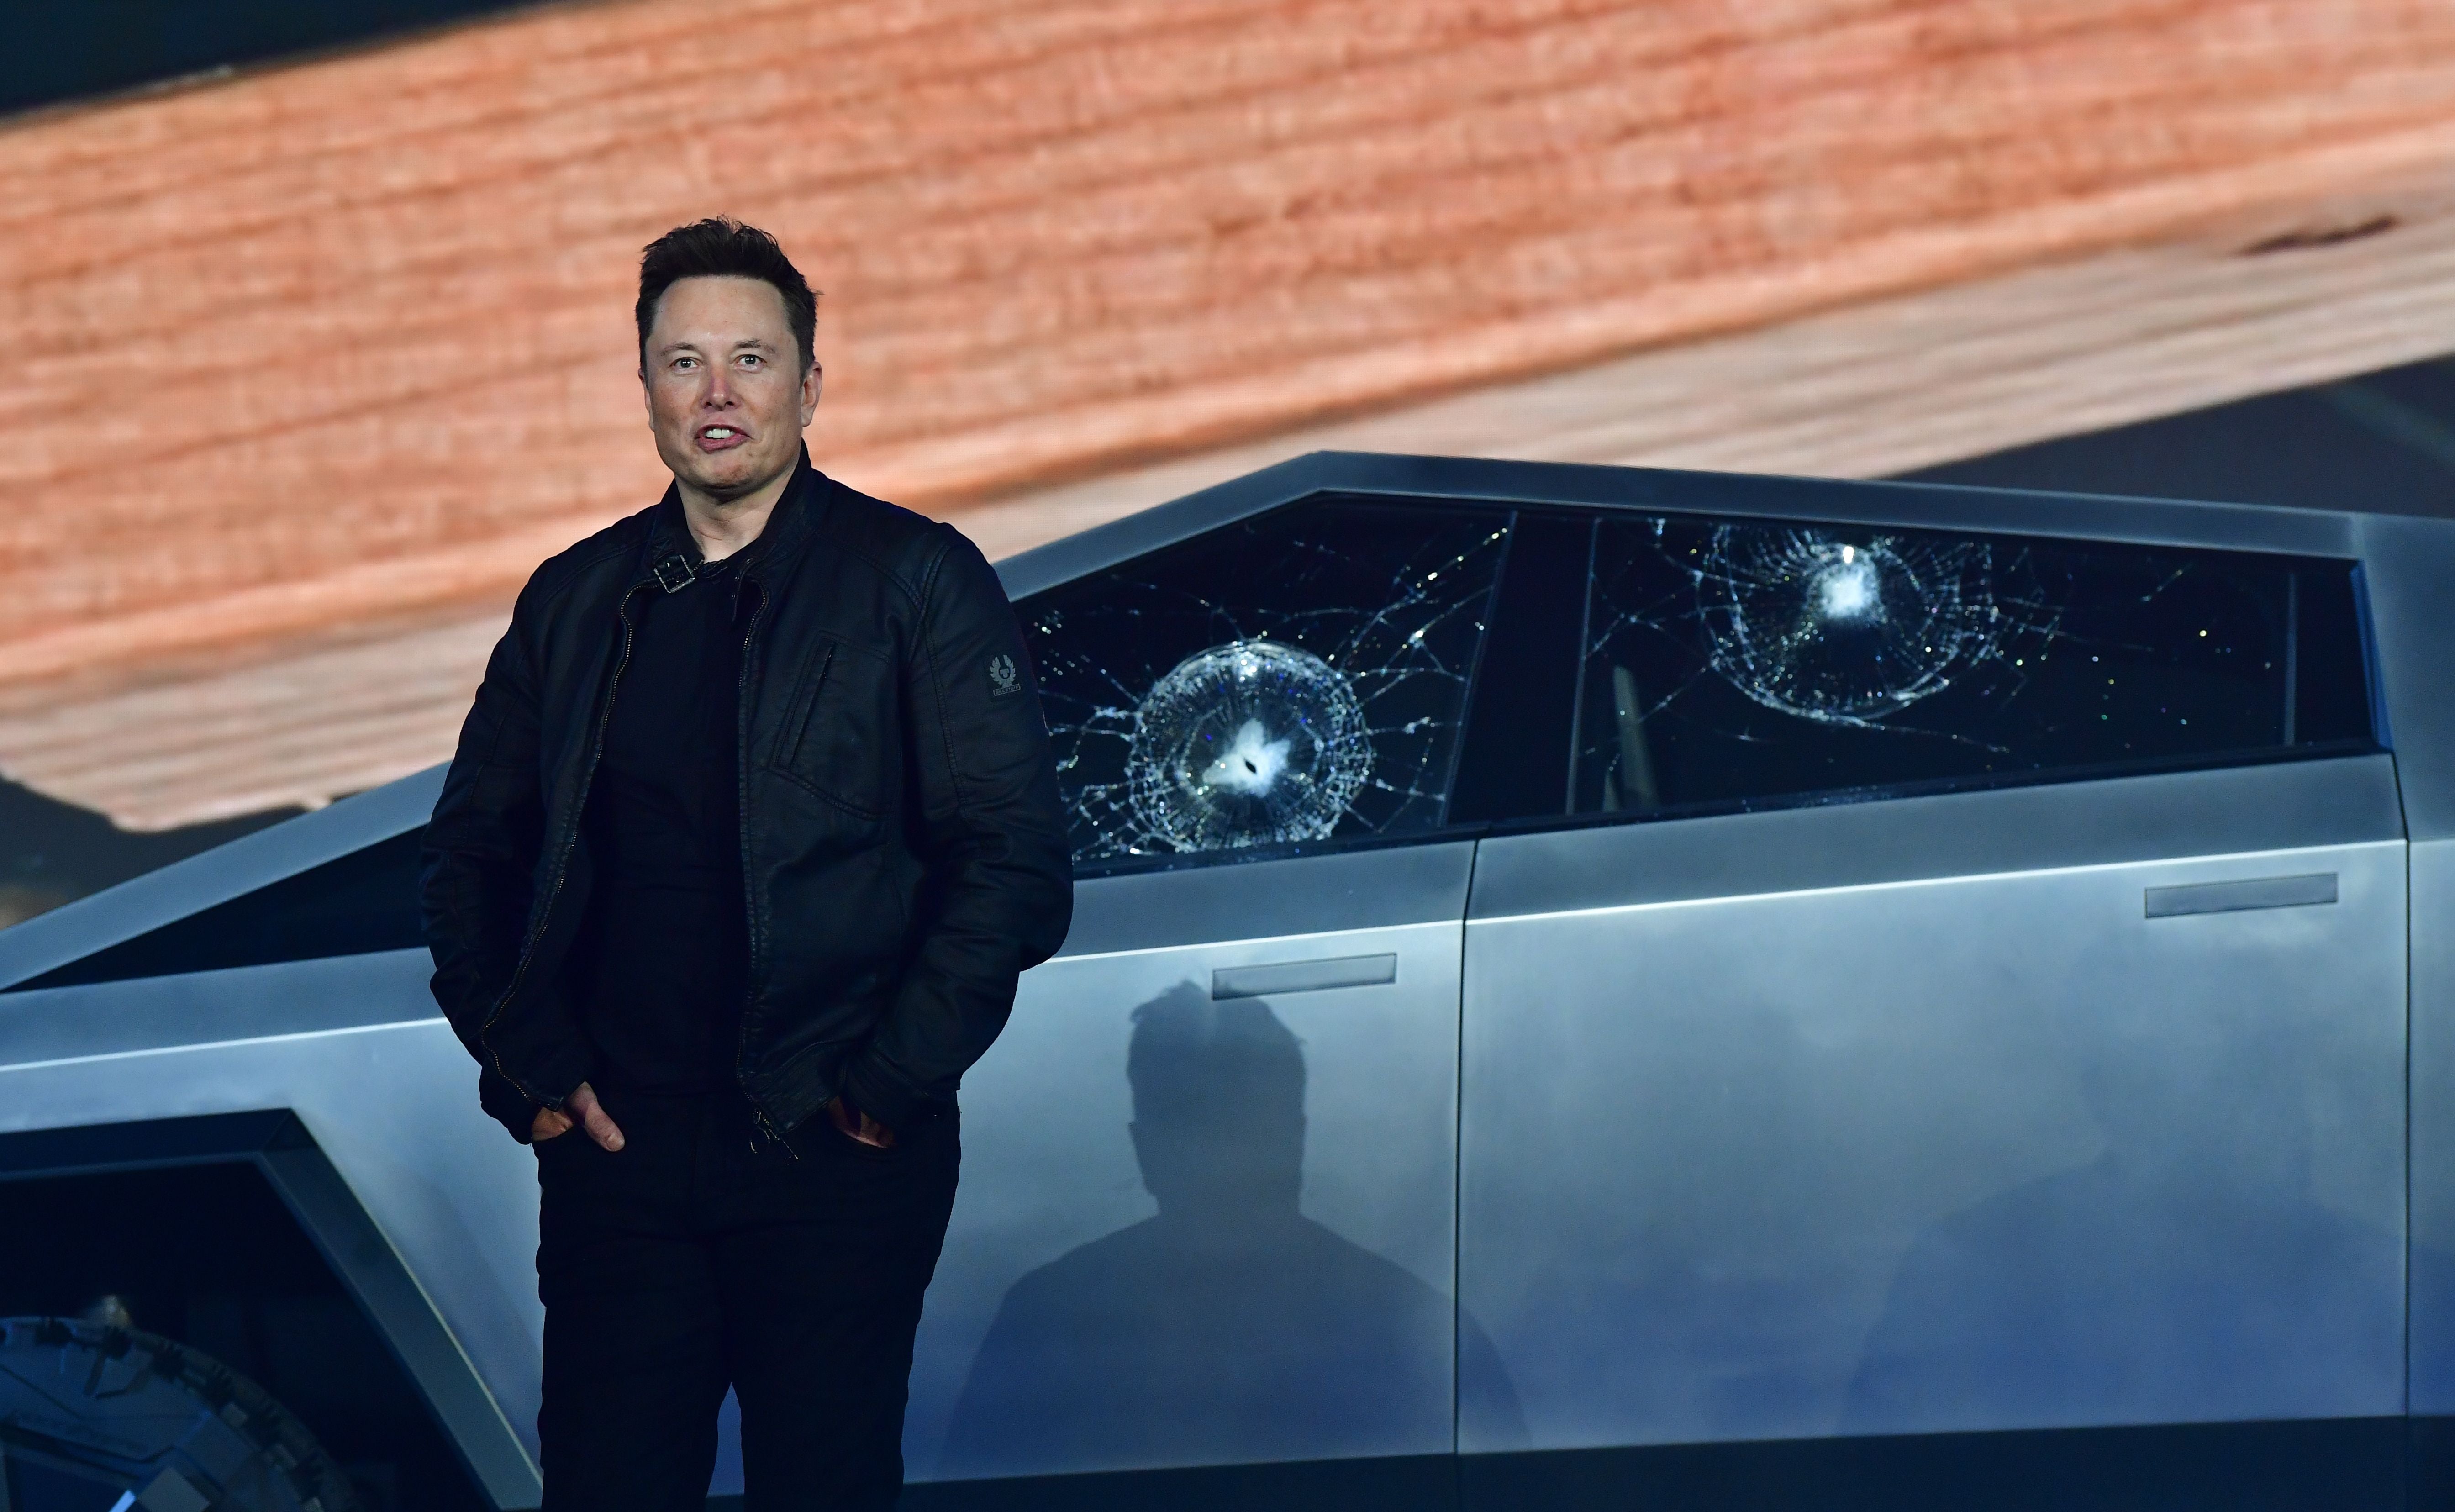 Tesla co-founder and CEO Elon Musk stands in front of the shattered windows of the newly unveiled all-electric battery-powered Tesla’s Cybertruck at Tesla Design Center in Hawthorne, California on November 21, 2019